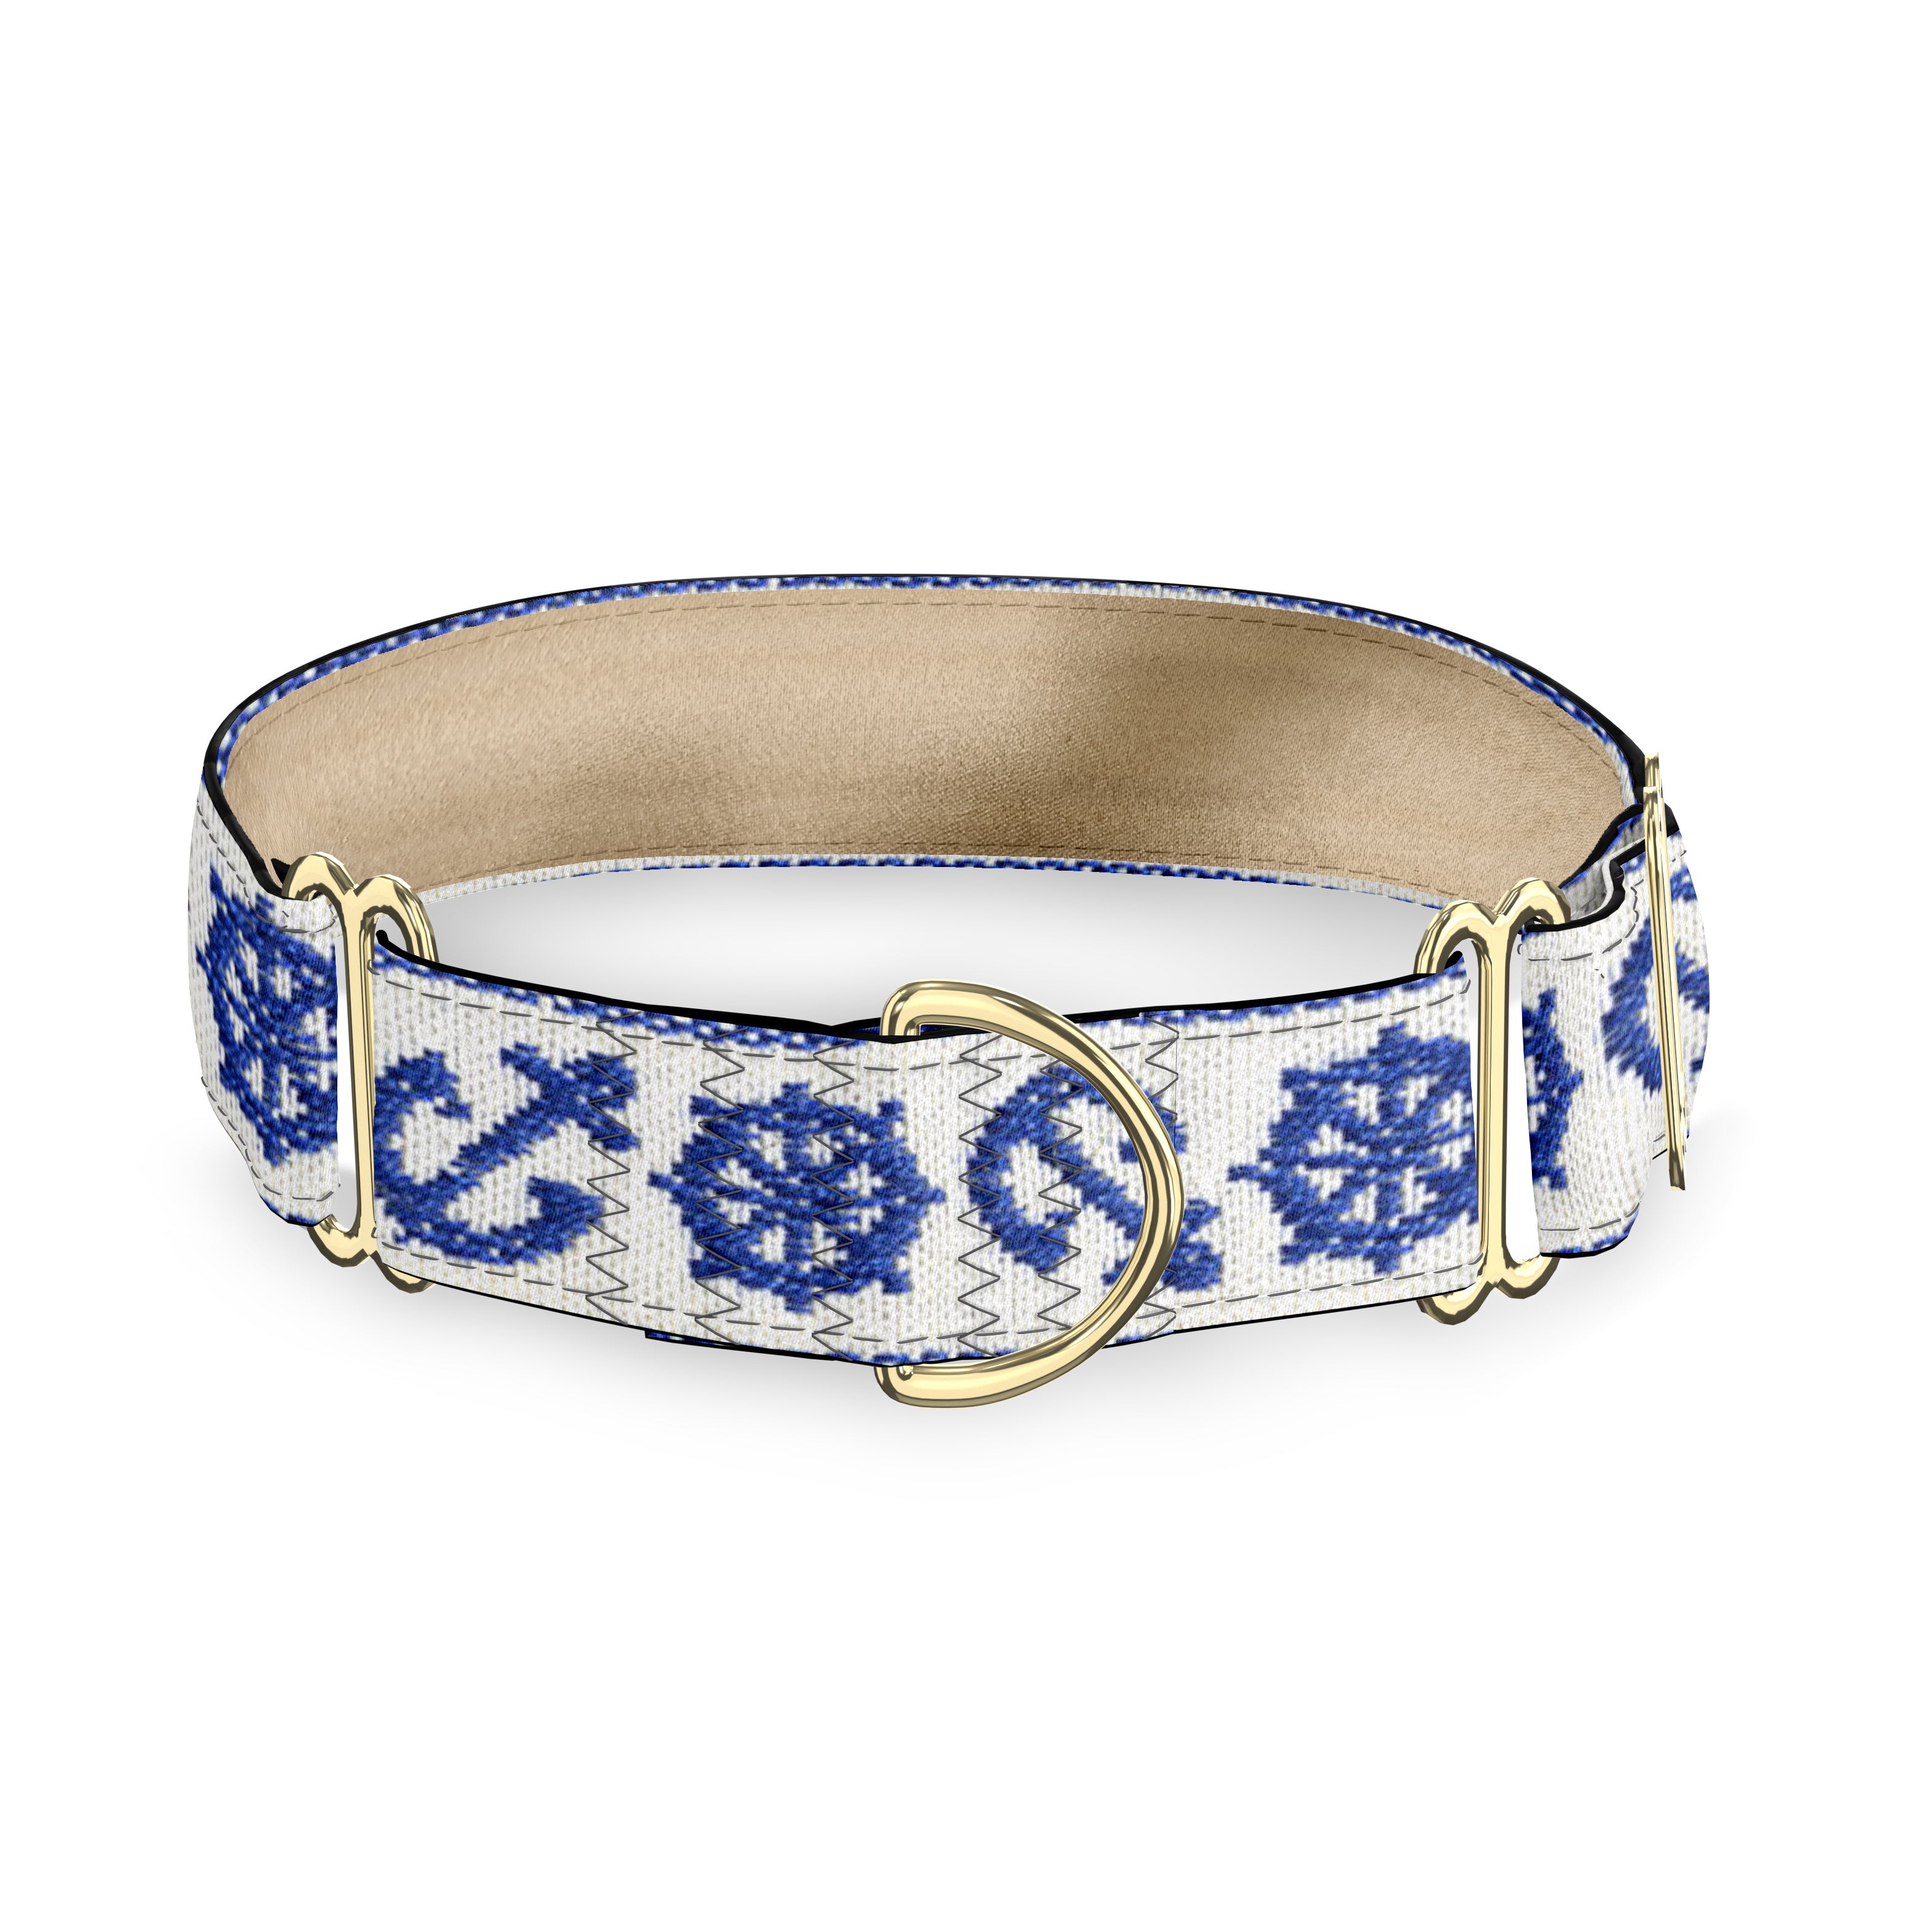 Anchors White and Blue Dog Collar